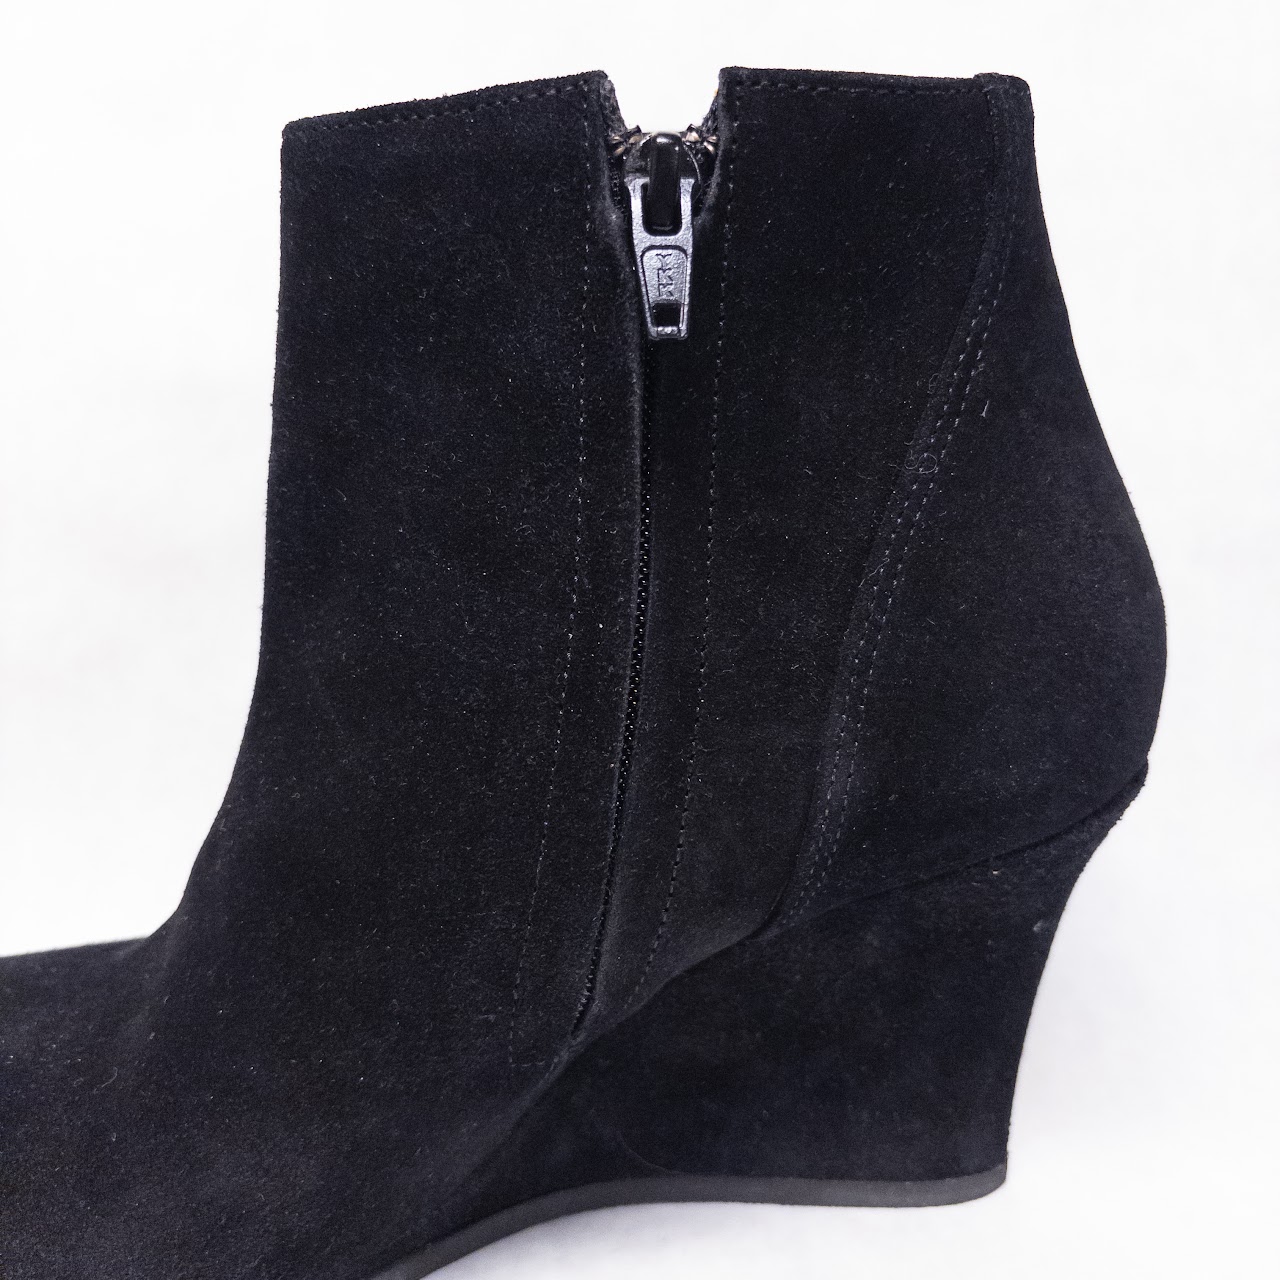 Lanvin Suede Wedge Ankle Boots